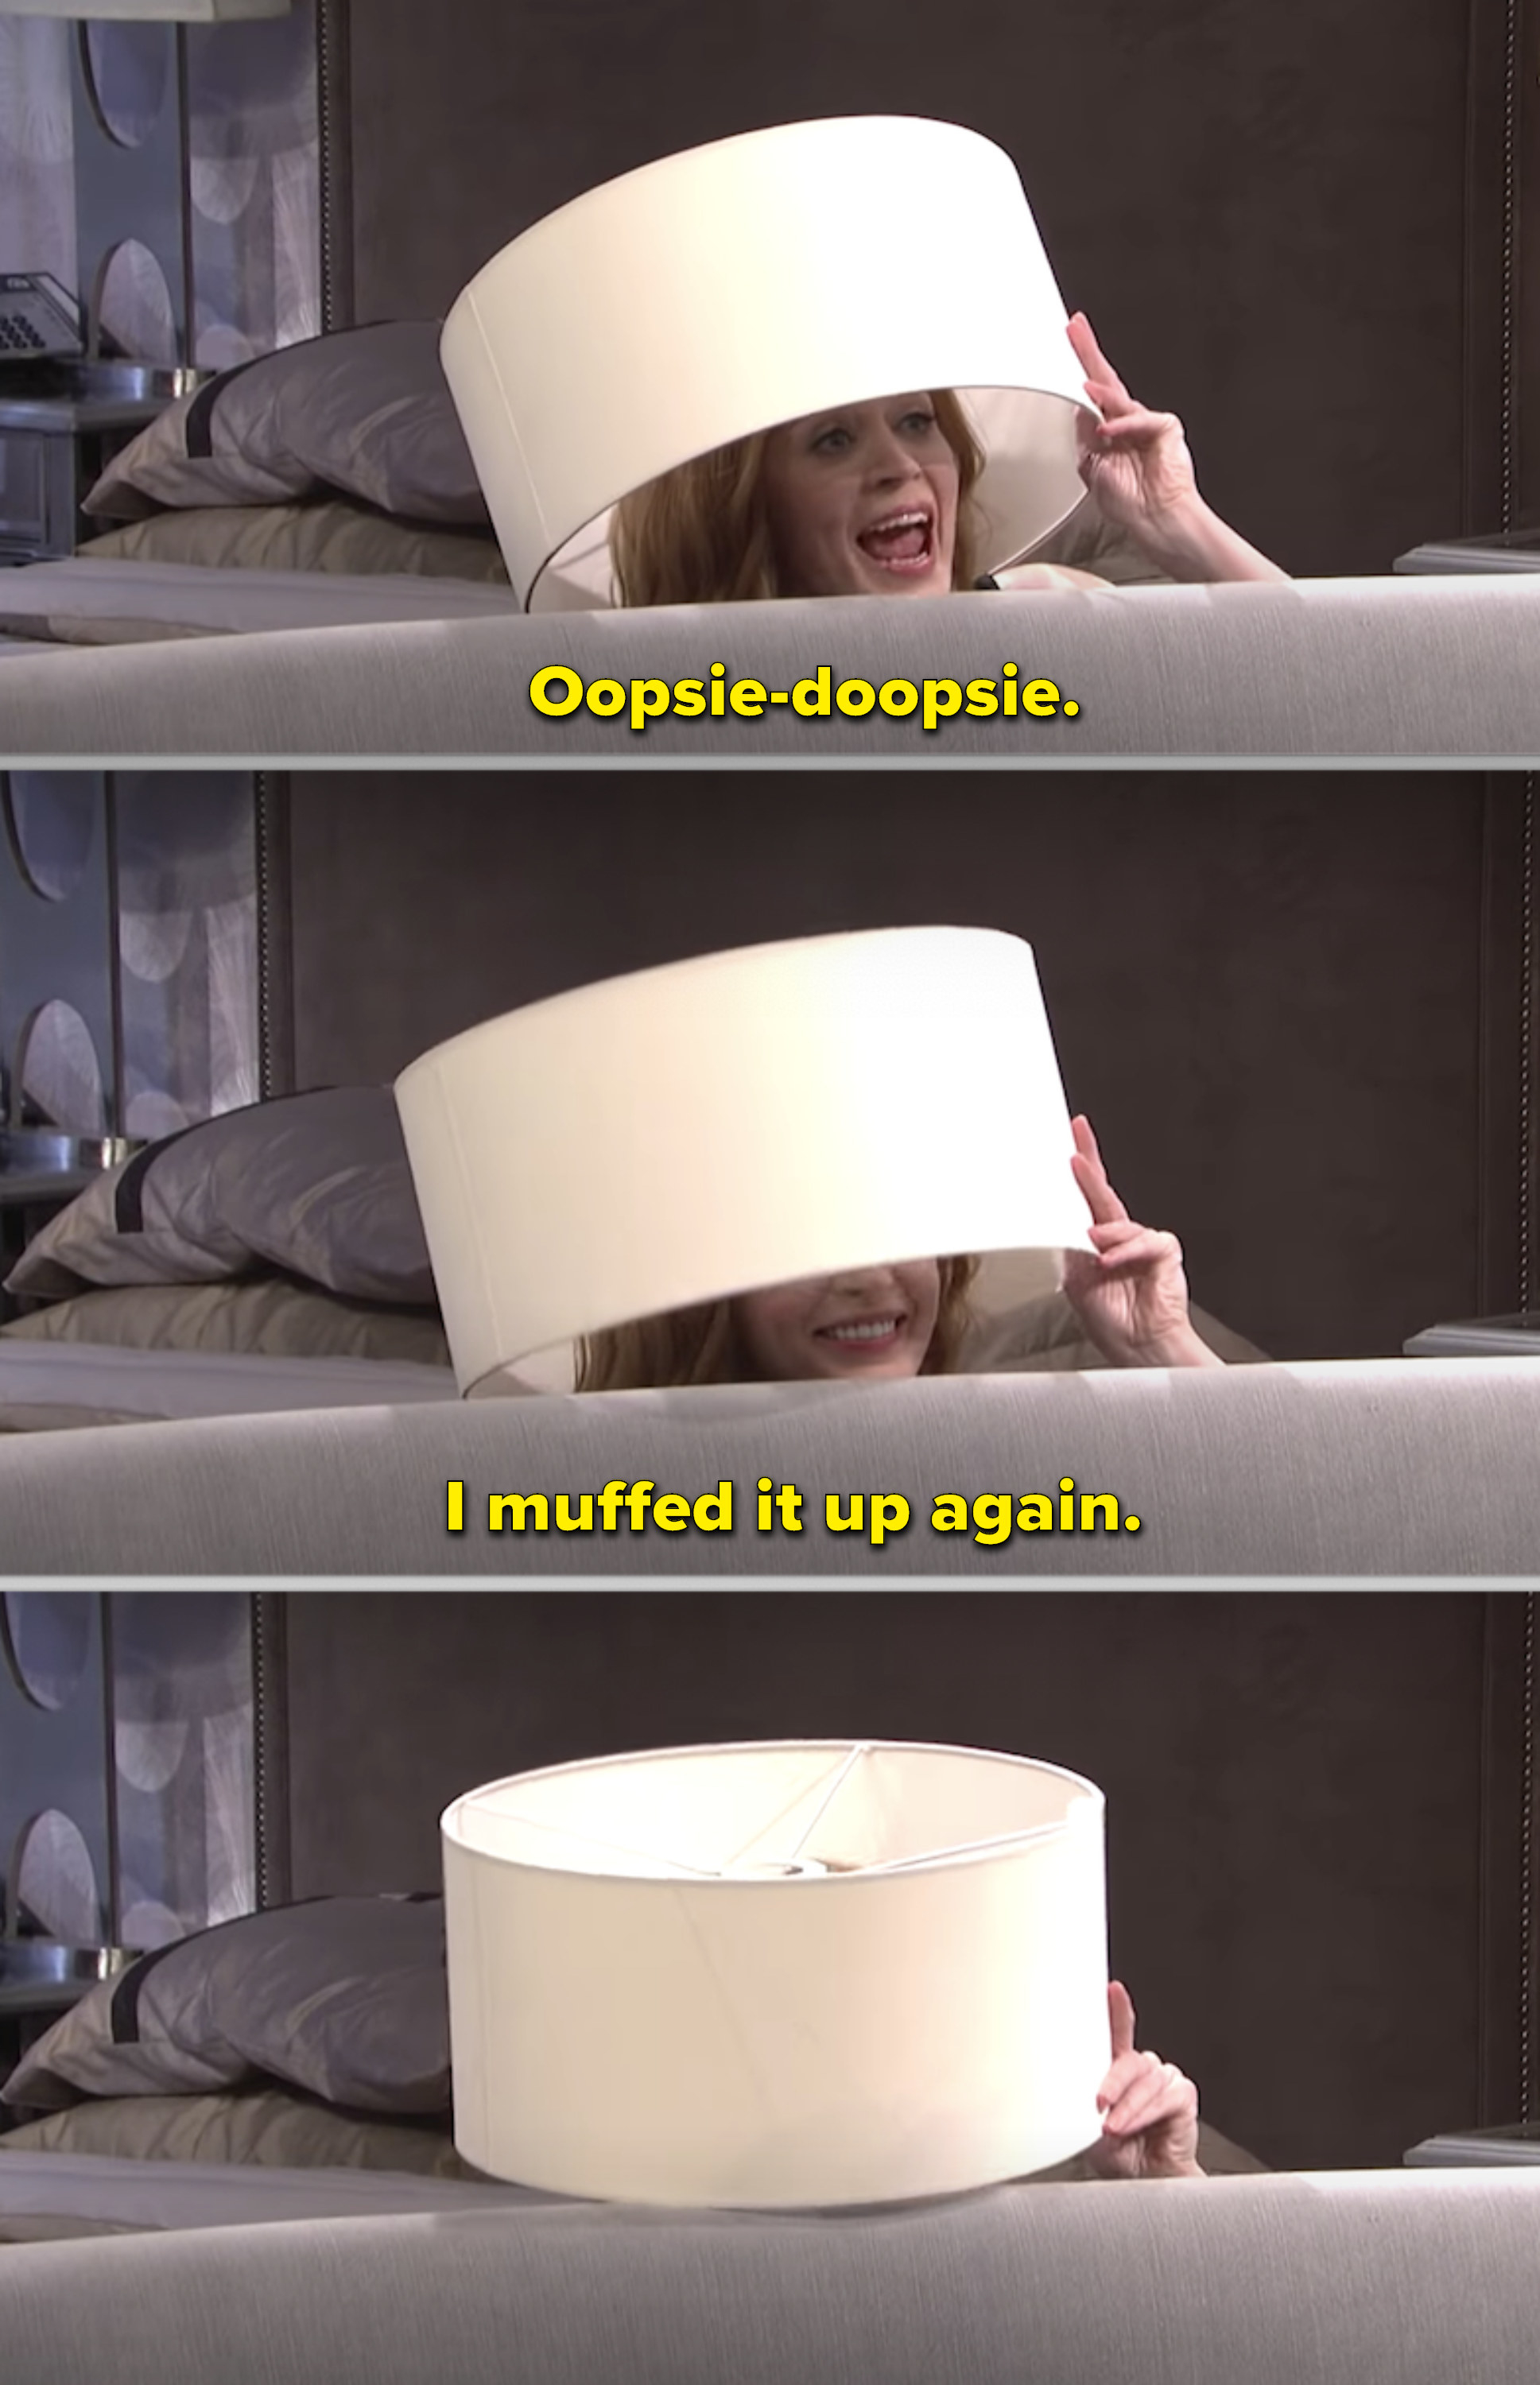 Woman with lampshade on head, showing different playful expressions, with humorous text about a mistake